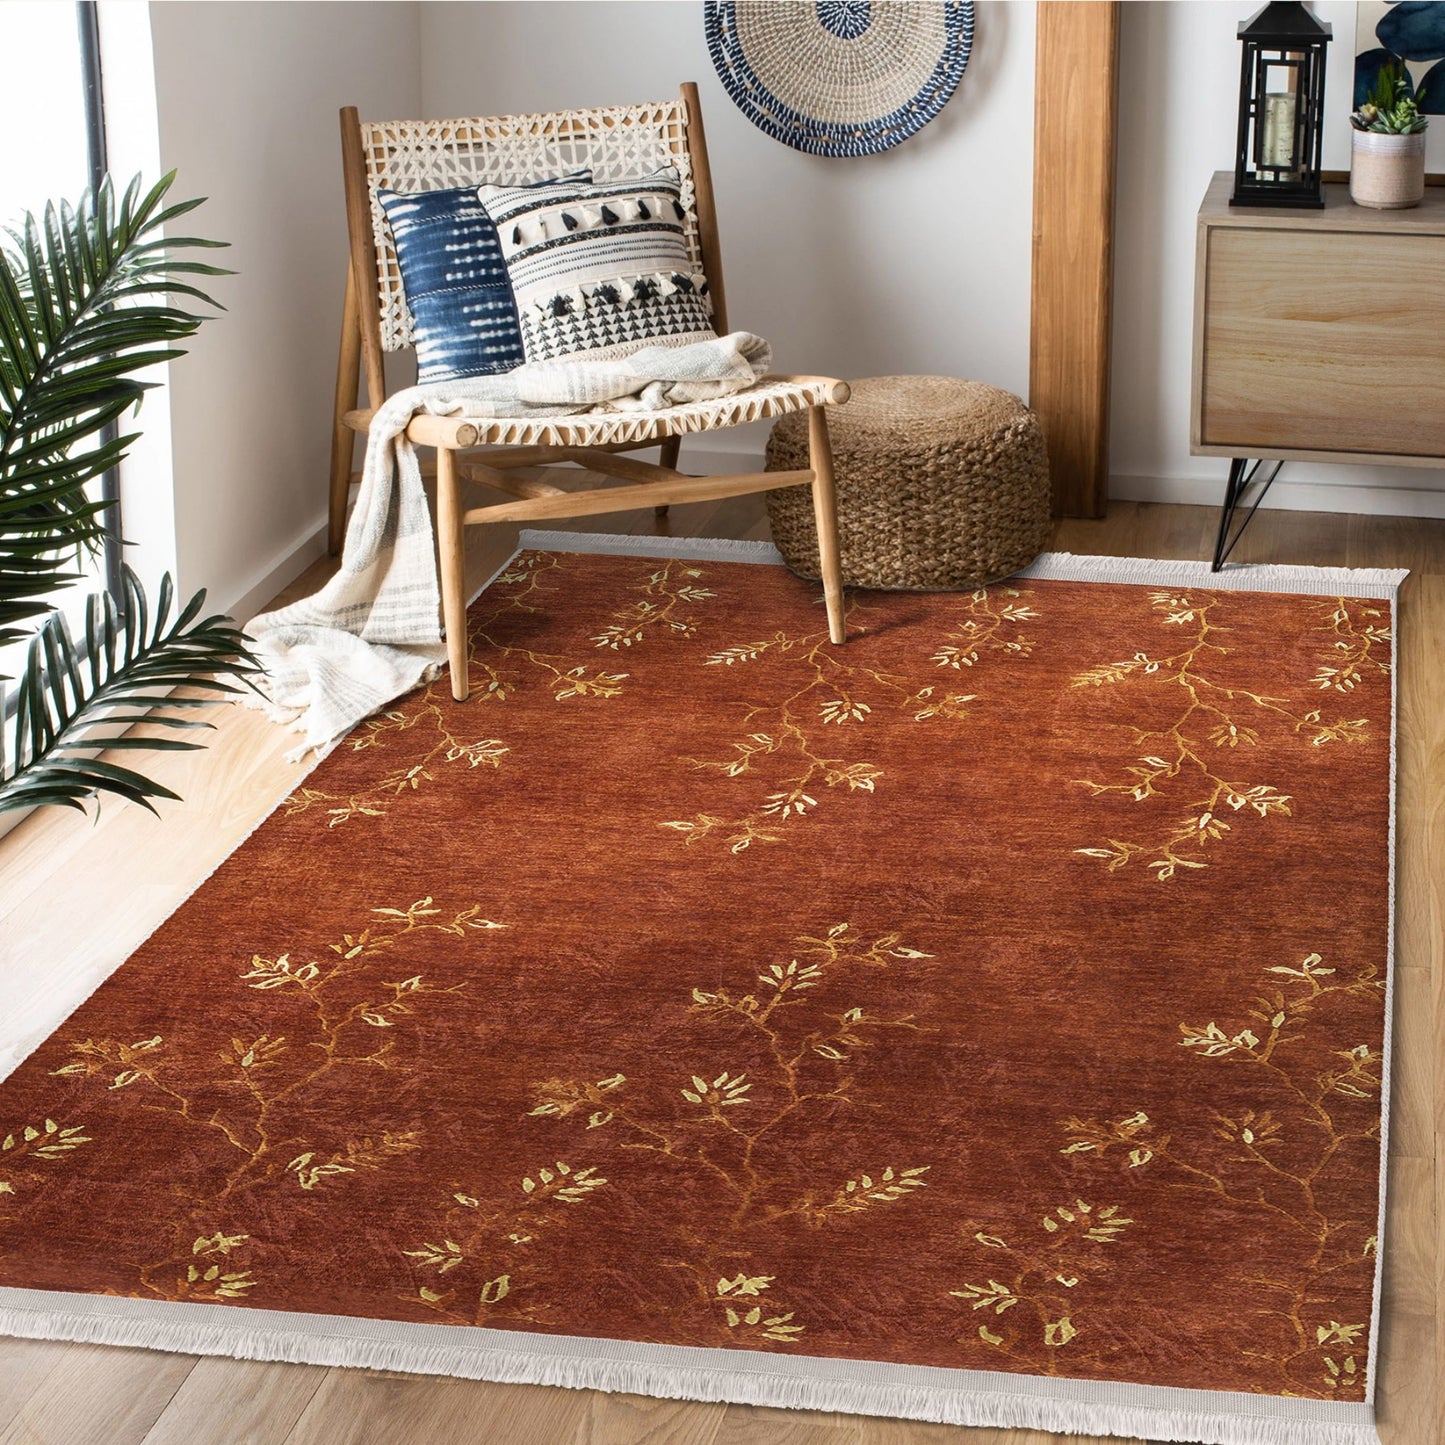 High-Quality Dry Flower Pattern Area Rug for Natural Decor